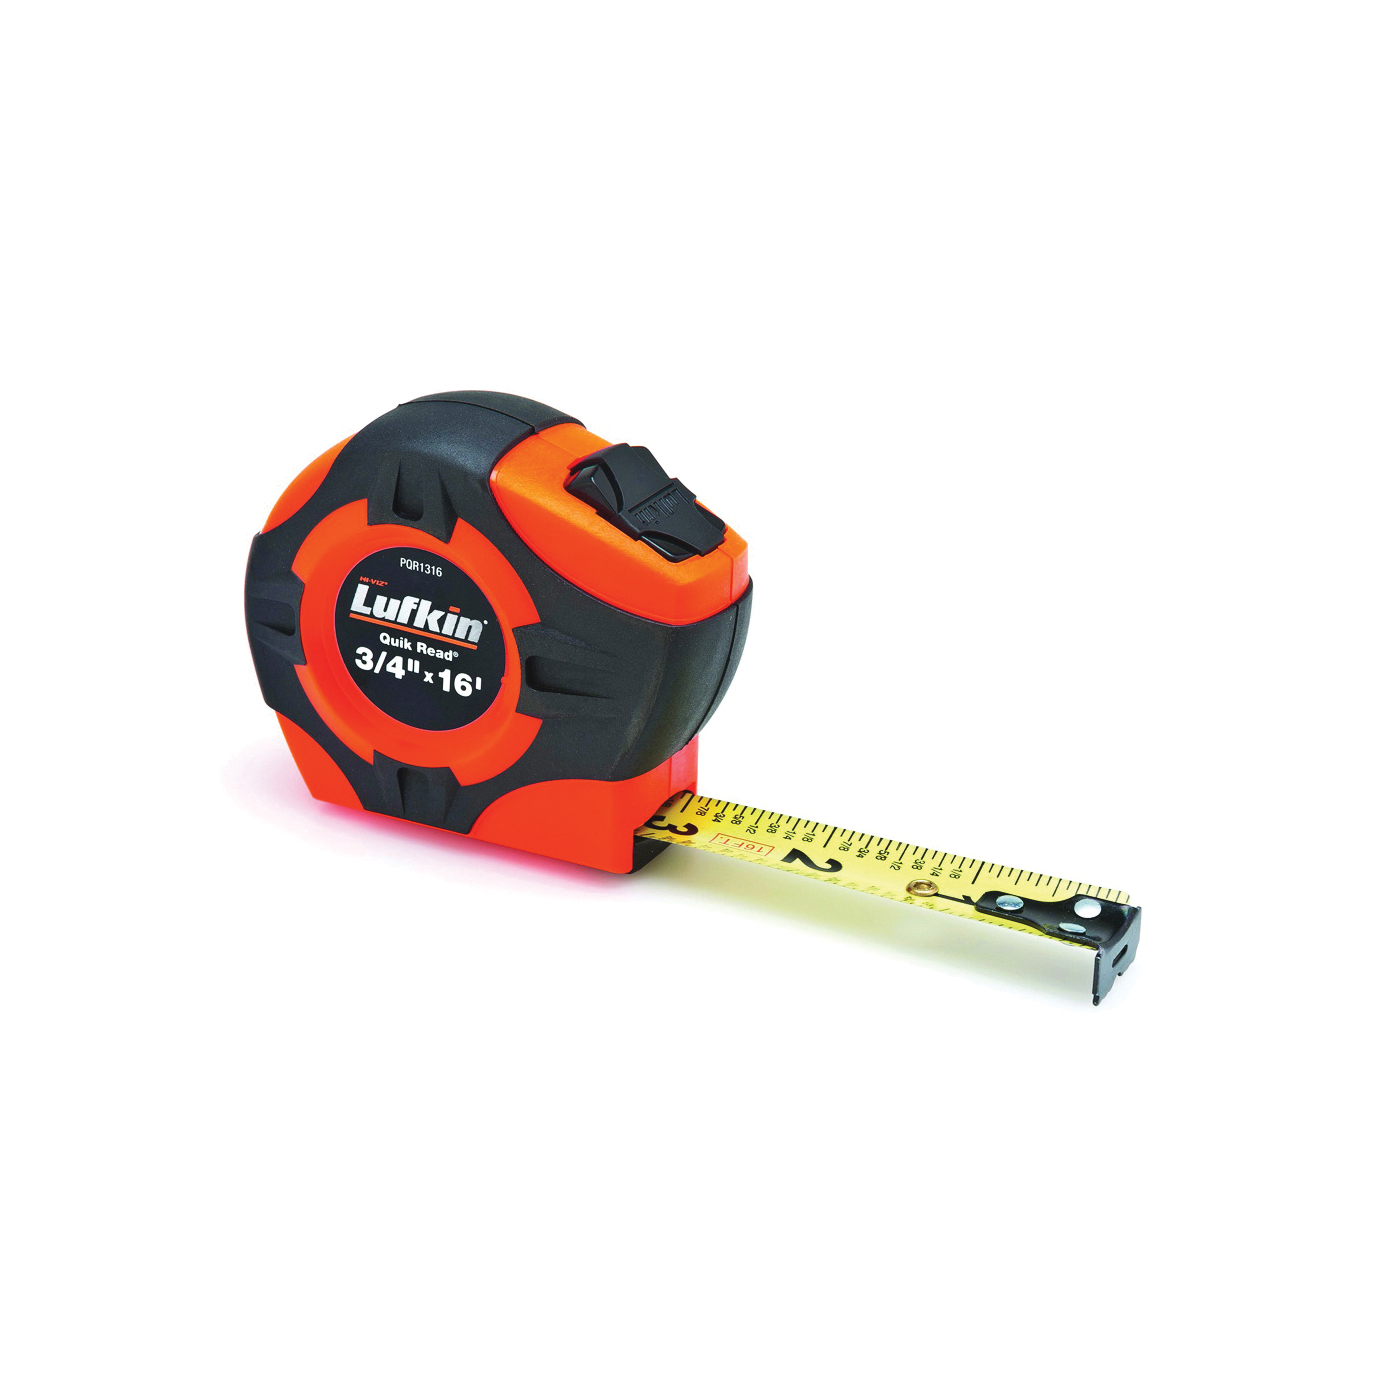 Crescent Lufkin Quikread Series PQR1316N Tape Measure, 16 ft L Blade, 3/4 in W Blade, Steel Blade, ABS/Rubber Case